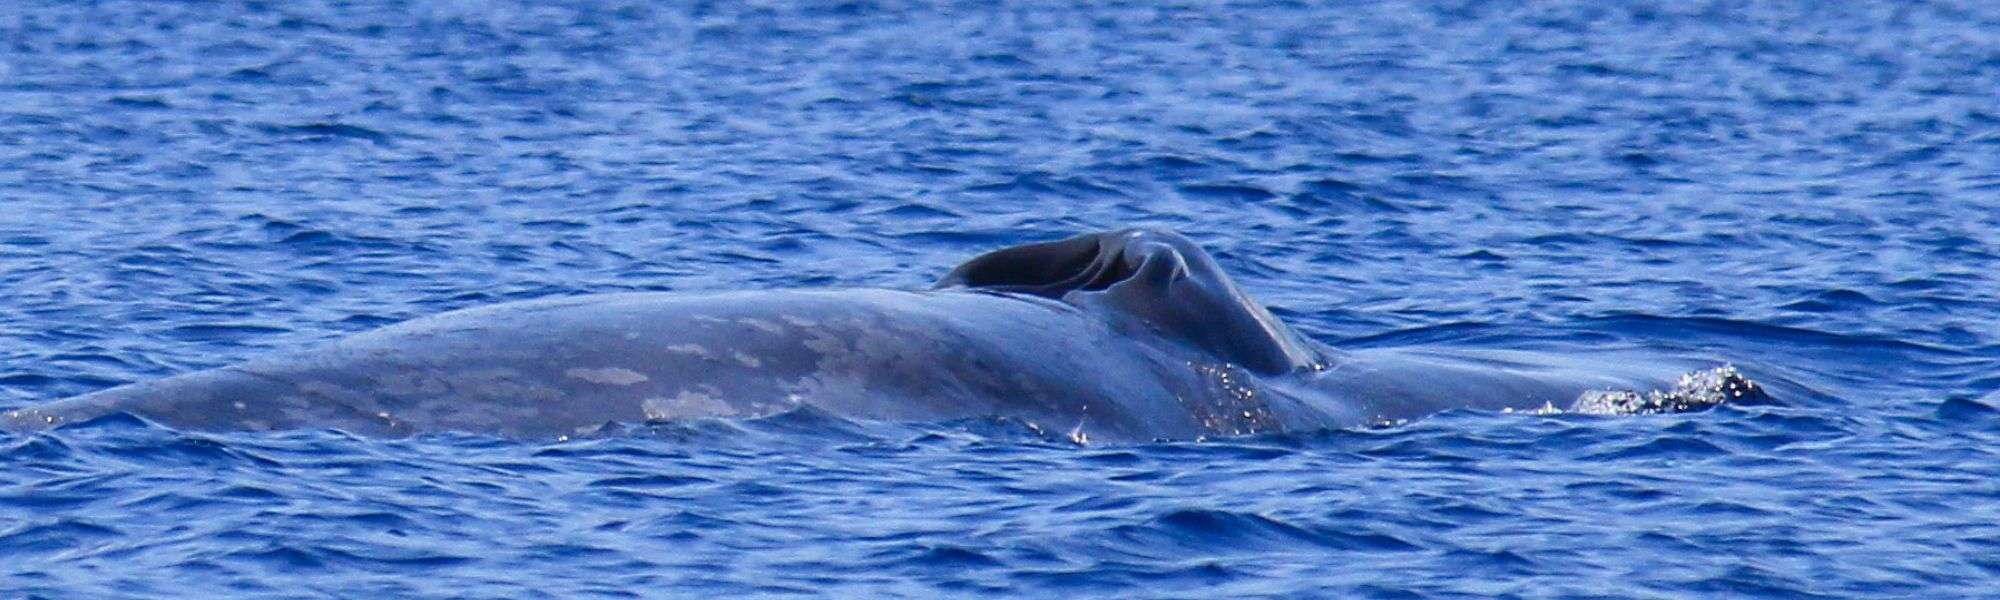 Intimate private lives of blue whales revealed for the first time